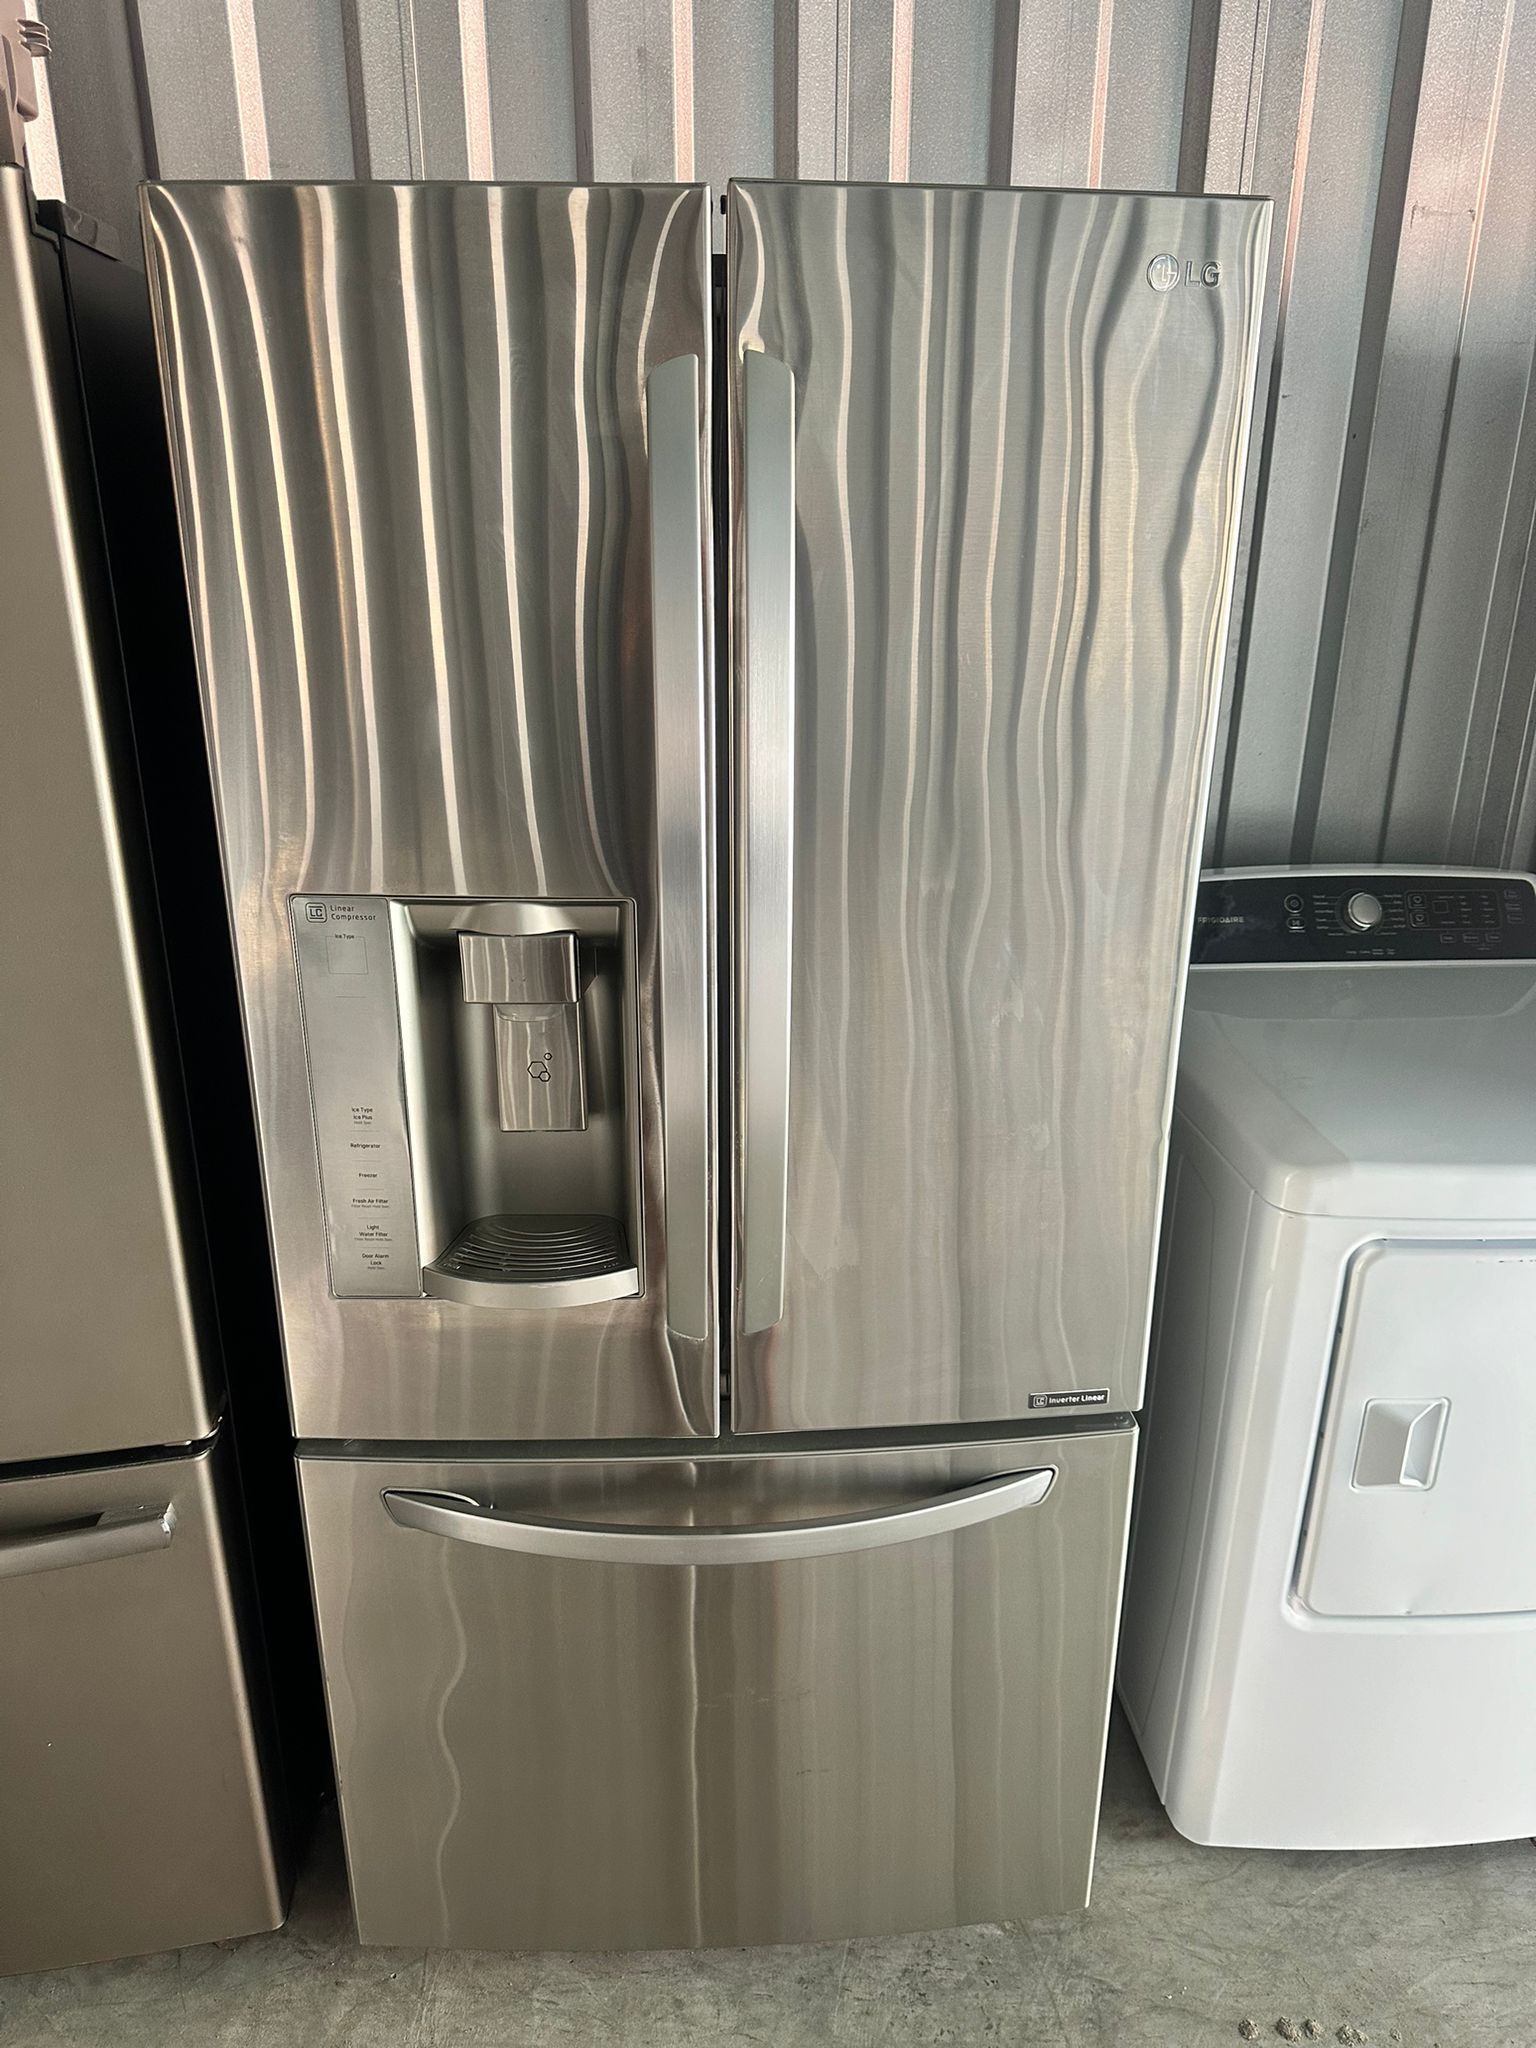 LG 33-wide refrigerator for sale with a 3-month warranty Price 780